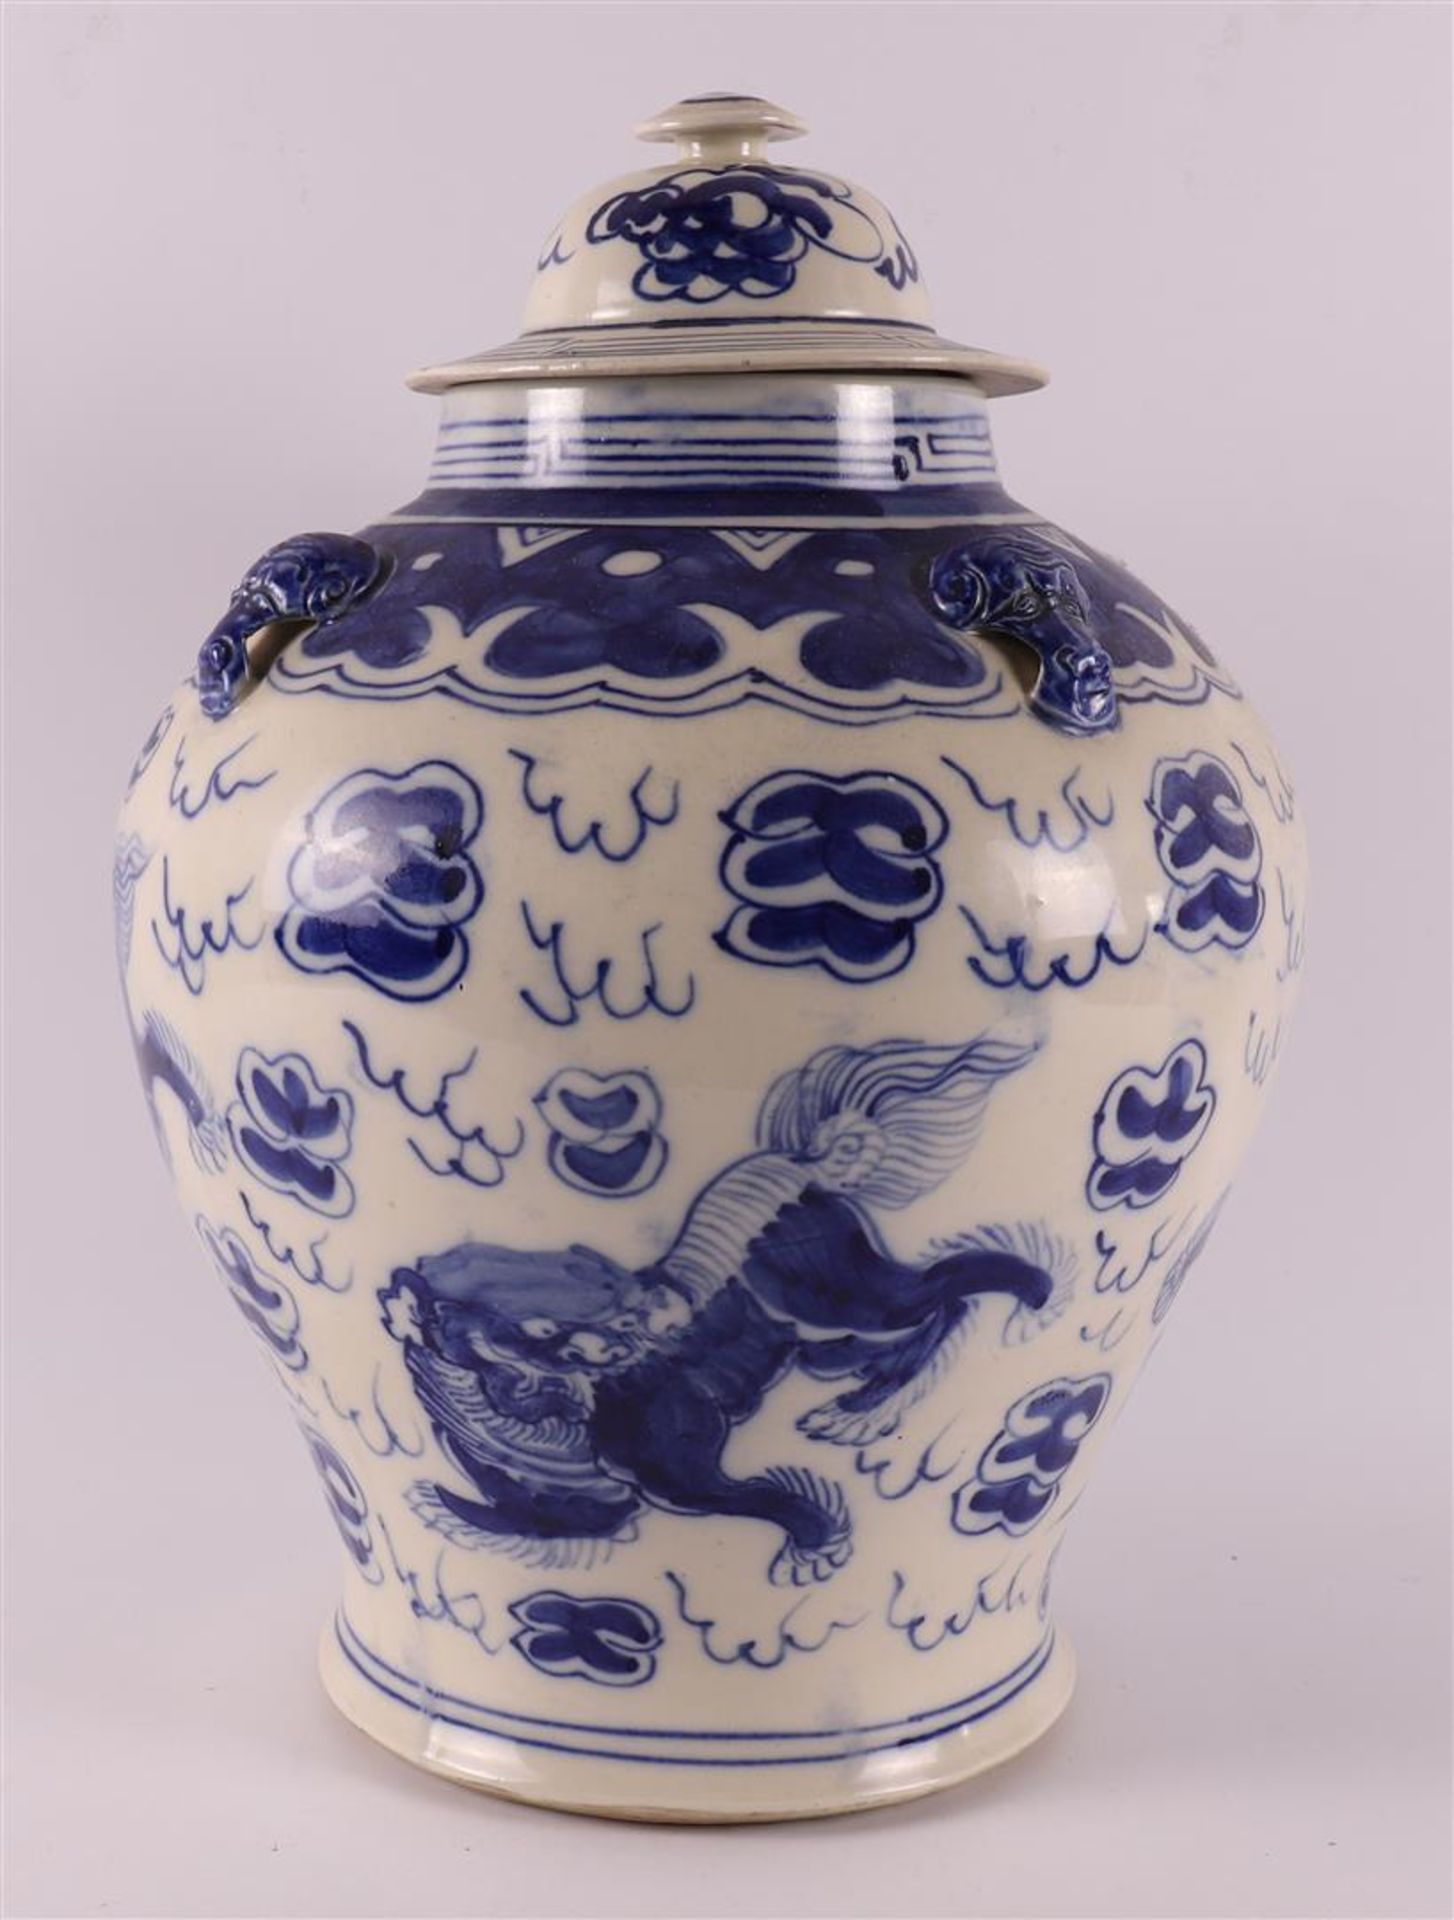 A blue/white porcelain vase with cover, China, 19th century.